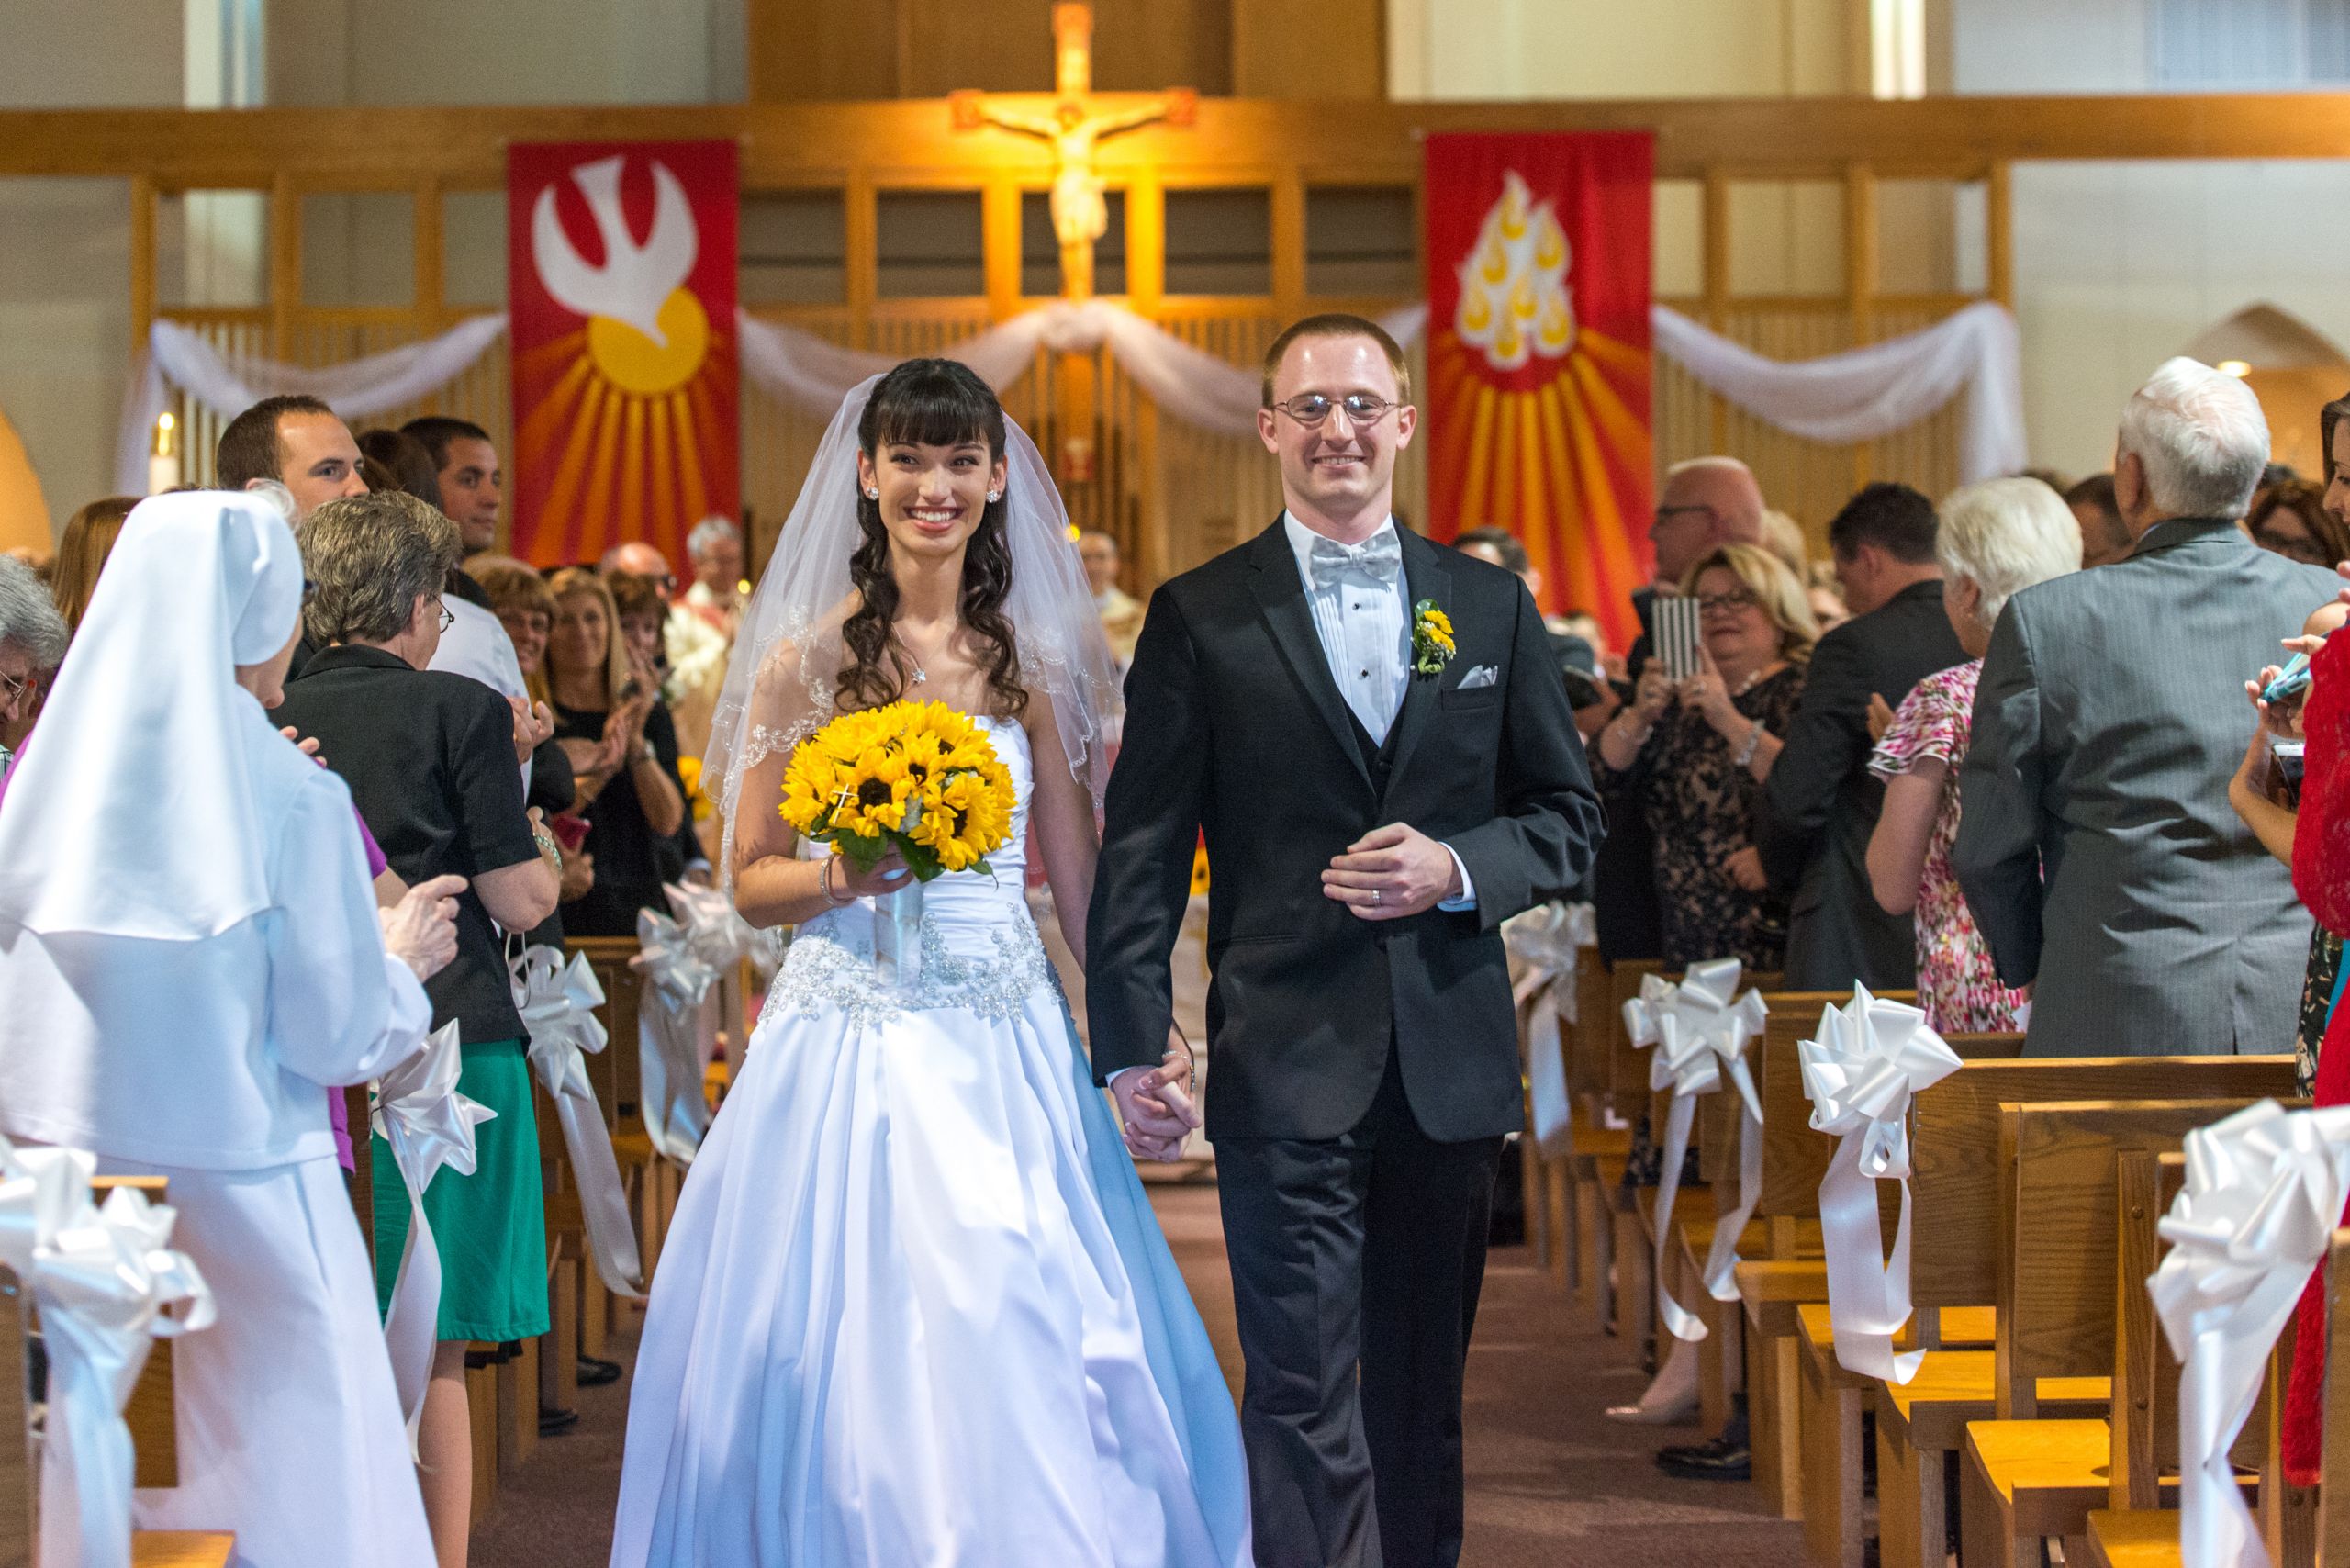 Catholic Wedding Vows
 The Beauty of Catholic Wedding Vows and the Nuptial Mass